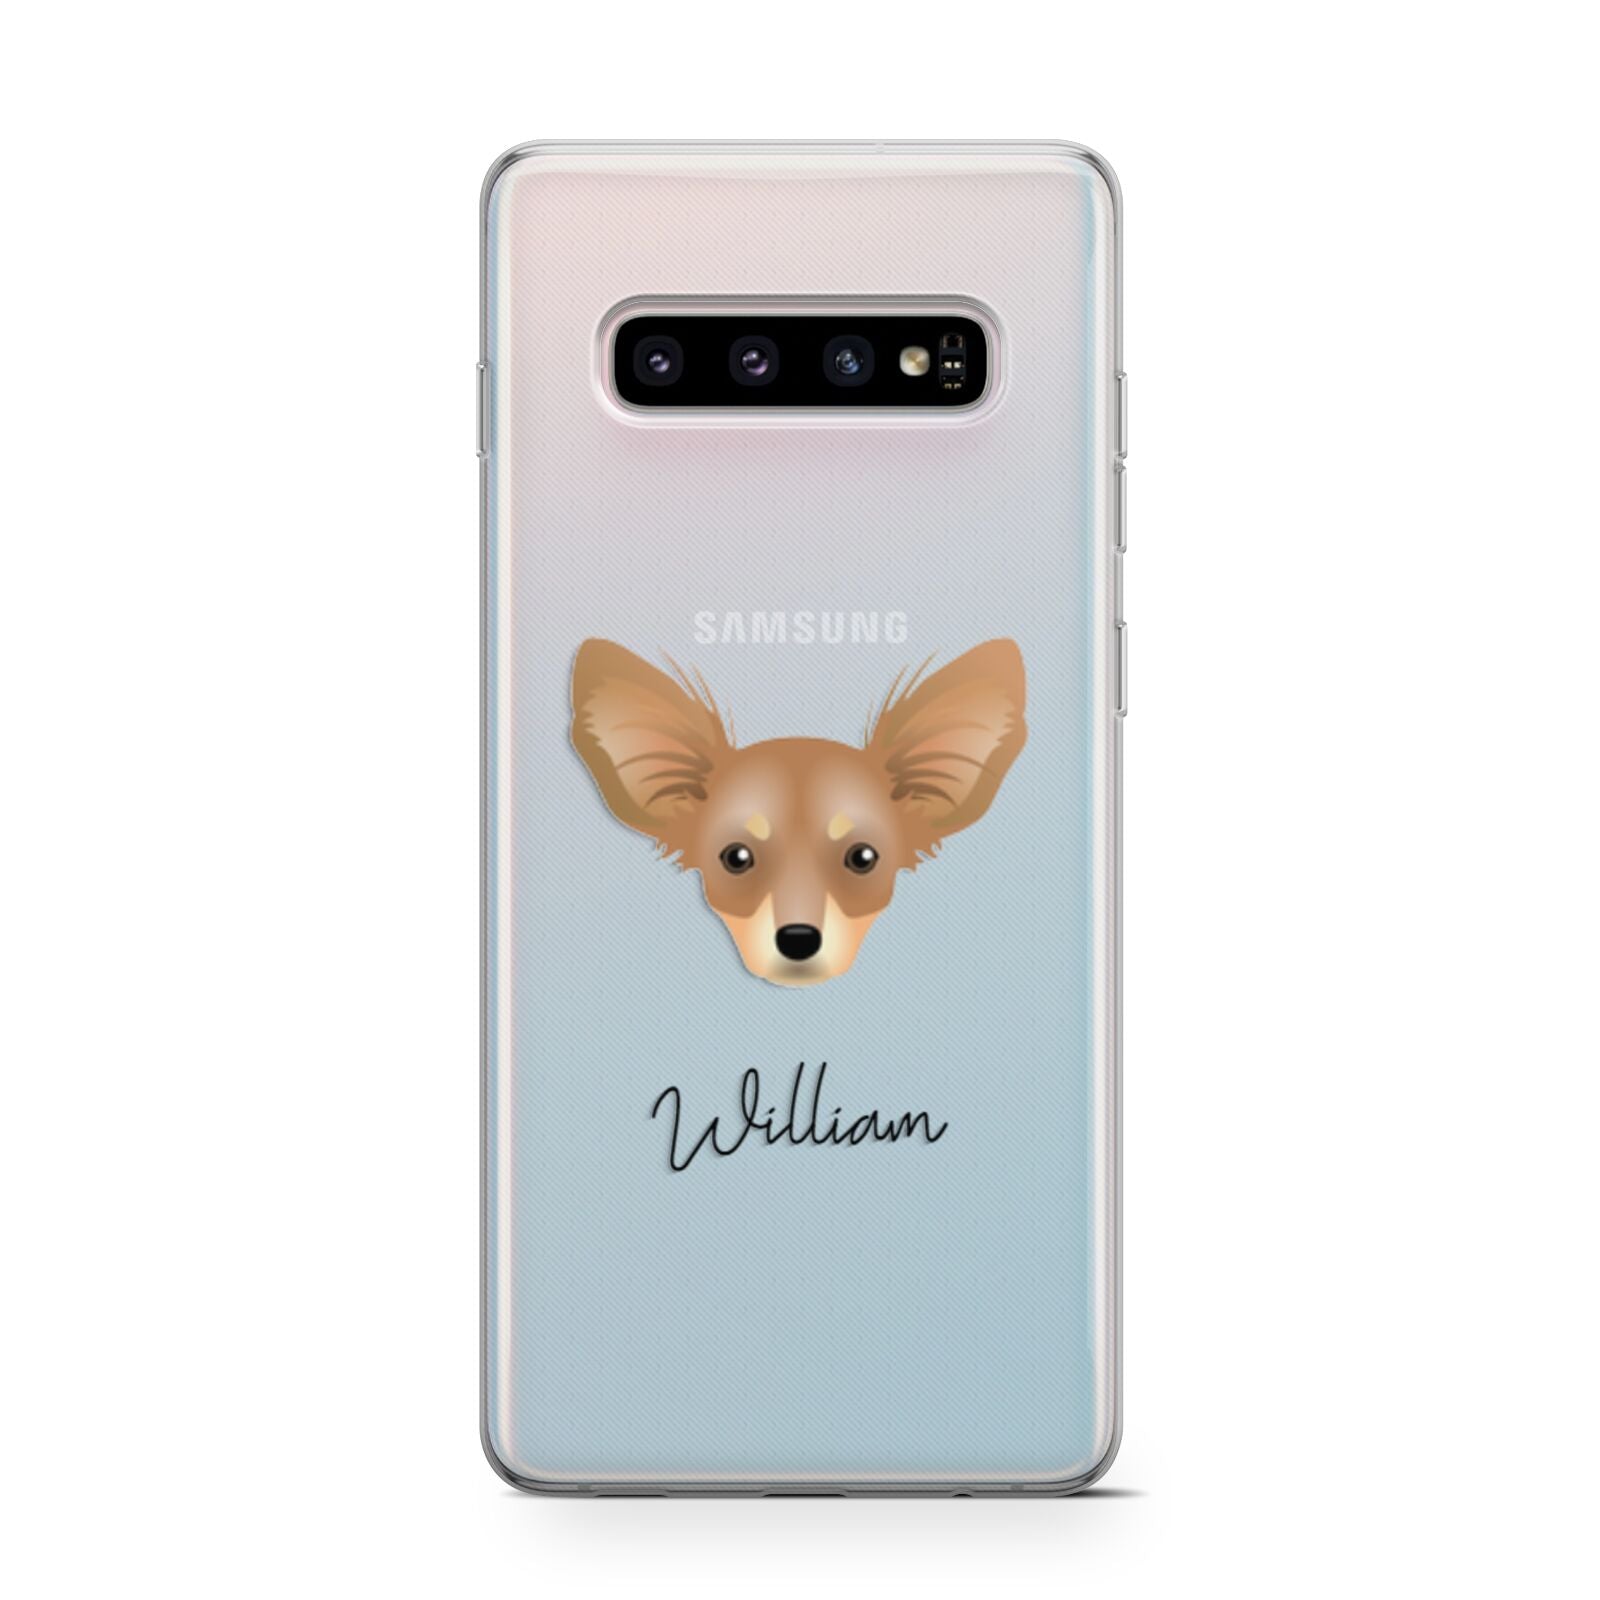 Russian Toy Personalised Samsung Galaxy S10 Case